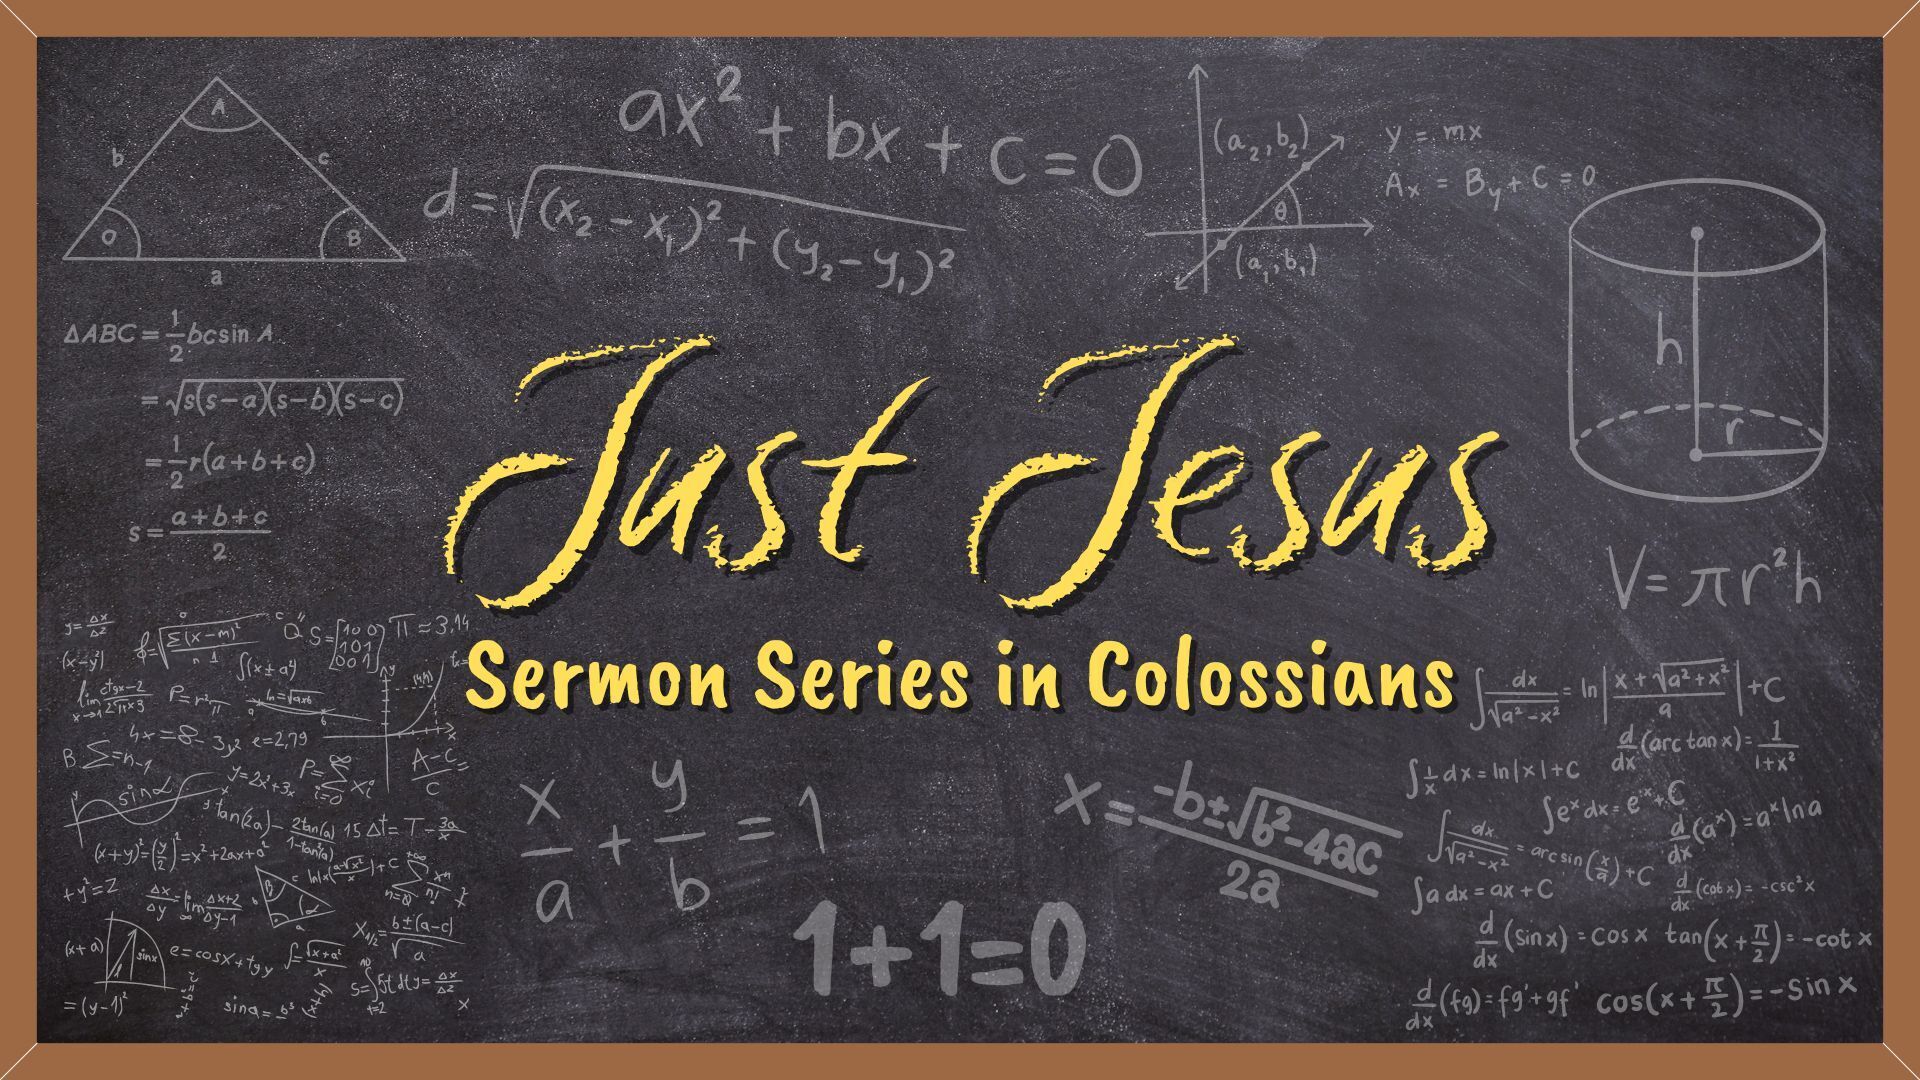 Just Jesus - Series in Colossians